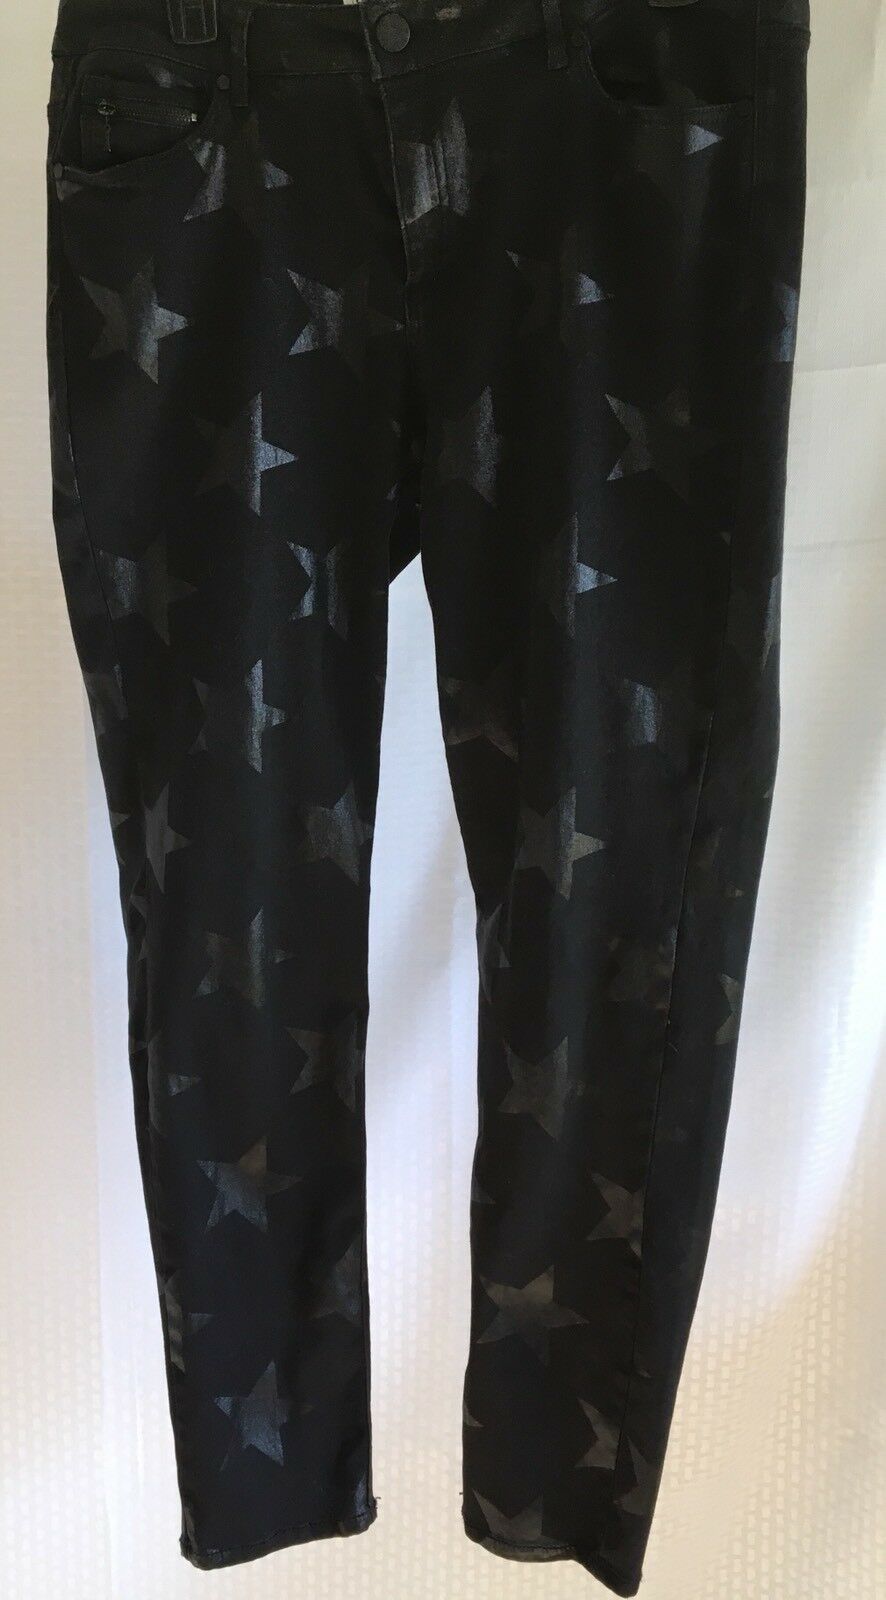 NWT For The Republic Size 8/28 Black Denim Skinny Jeans With Black Star Detail